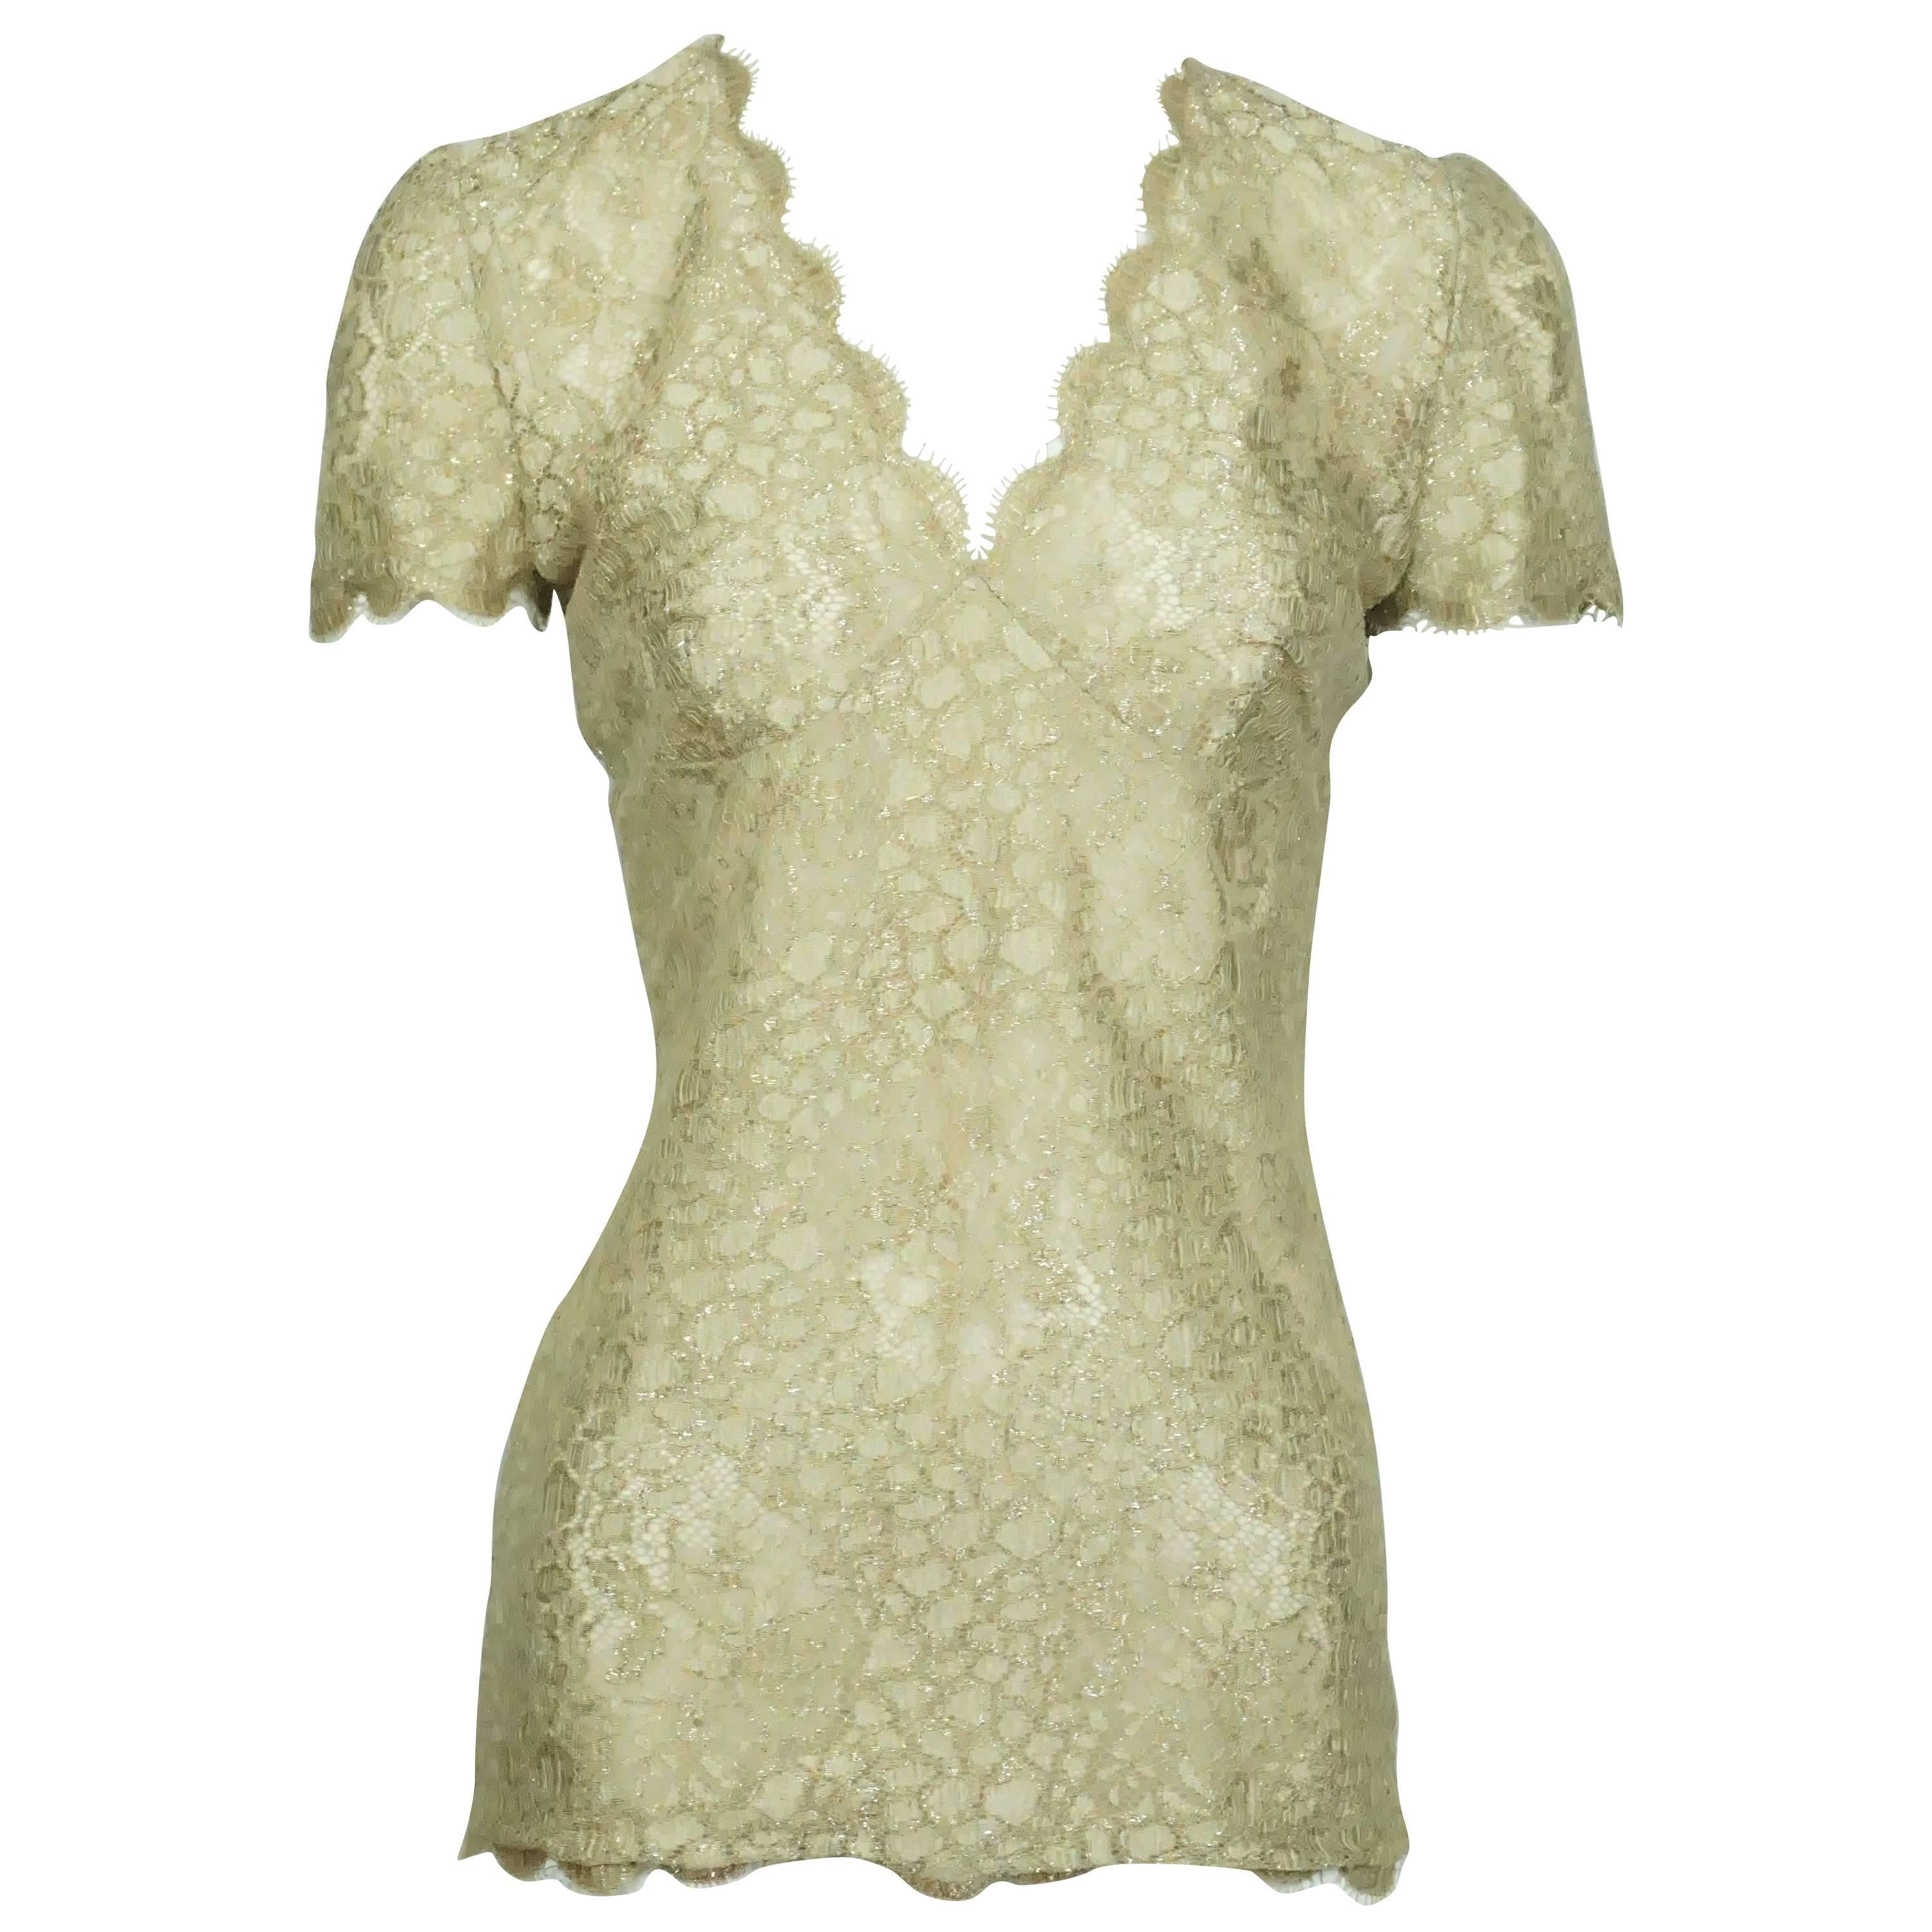 Emanuel Ungaro Gold Shimmery Lace Top with Sleeves - Medium 